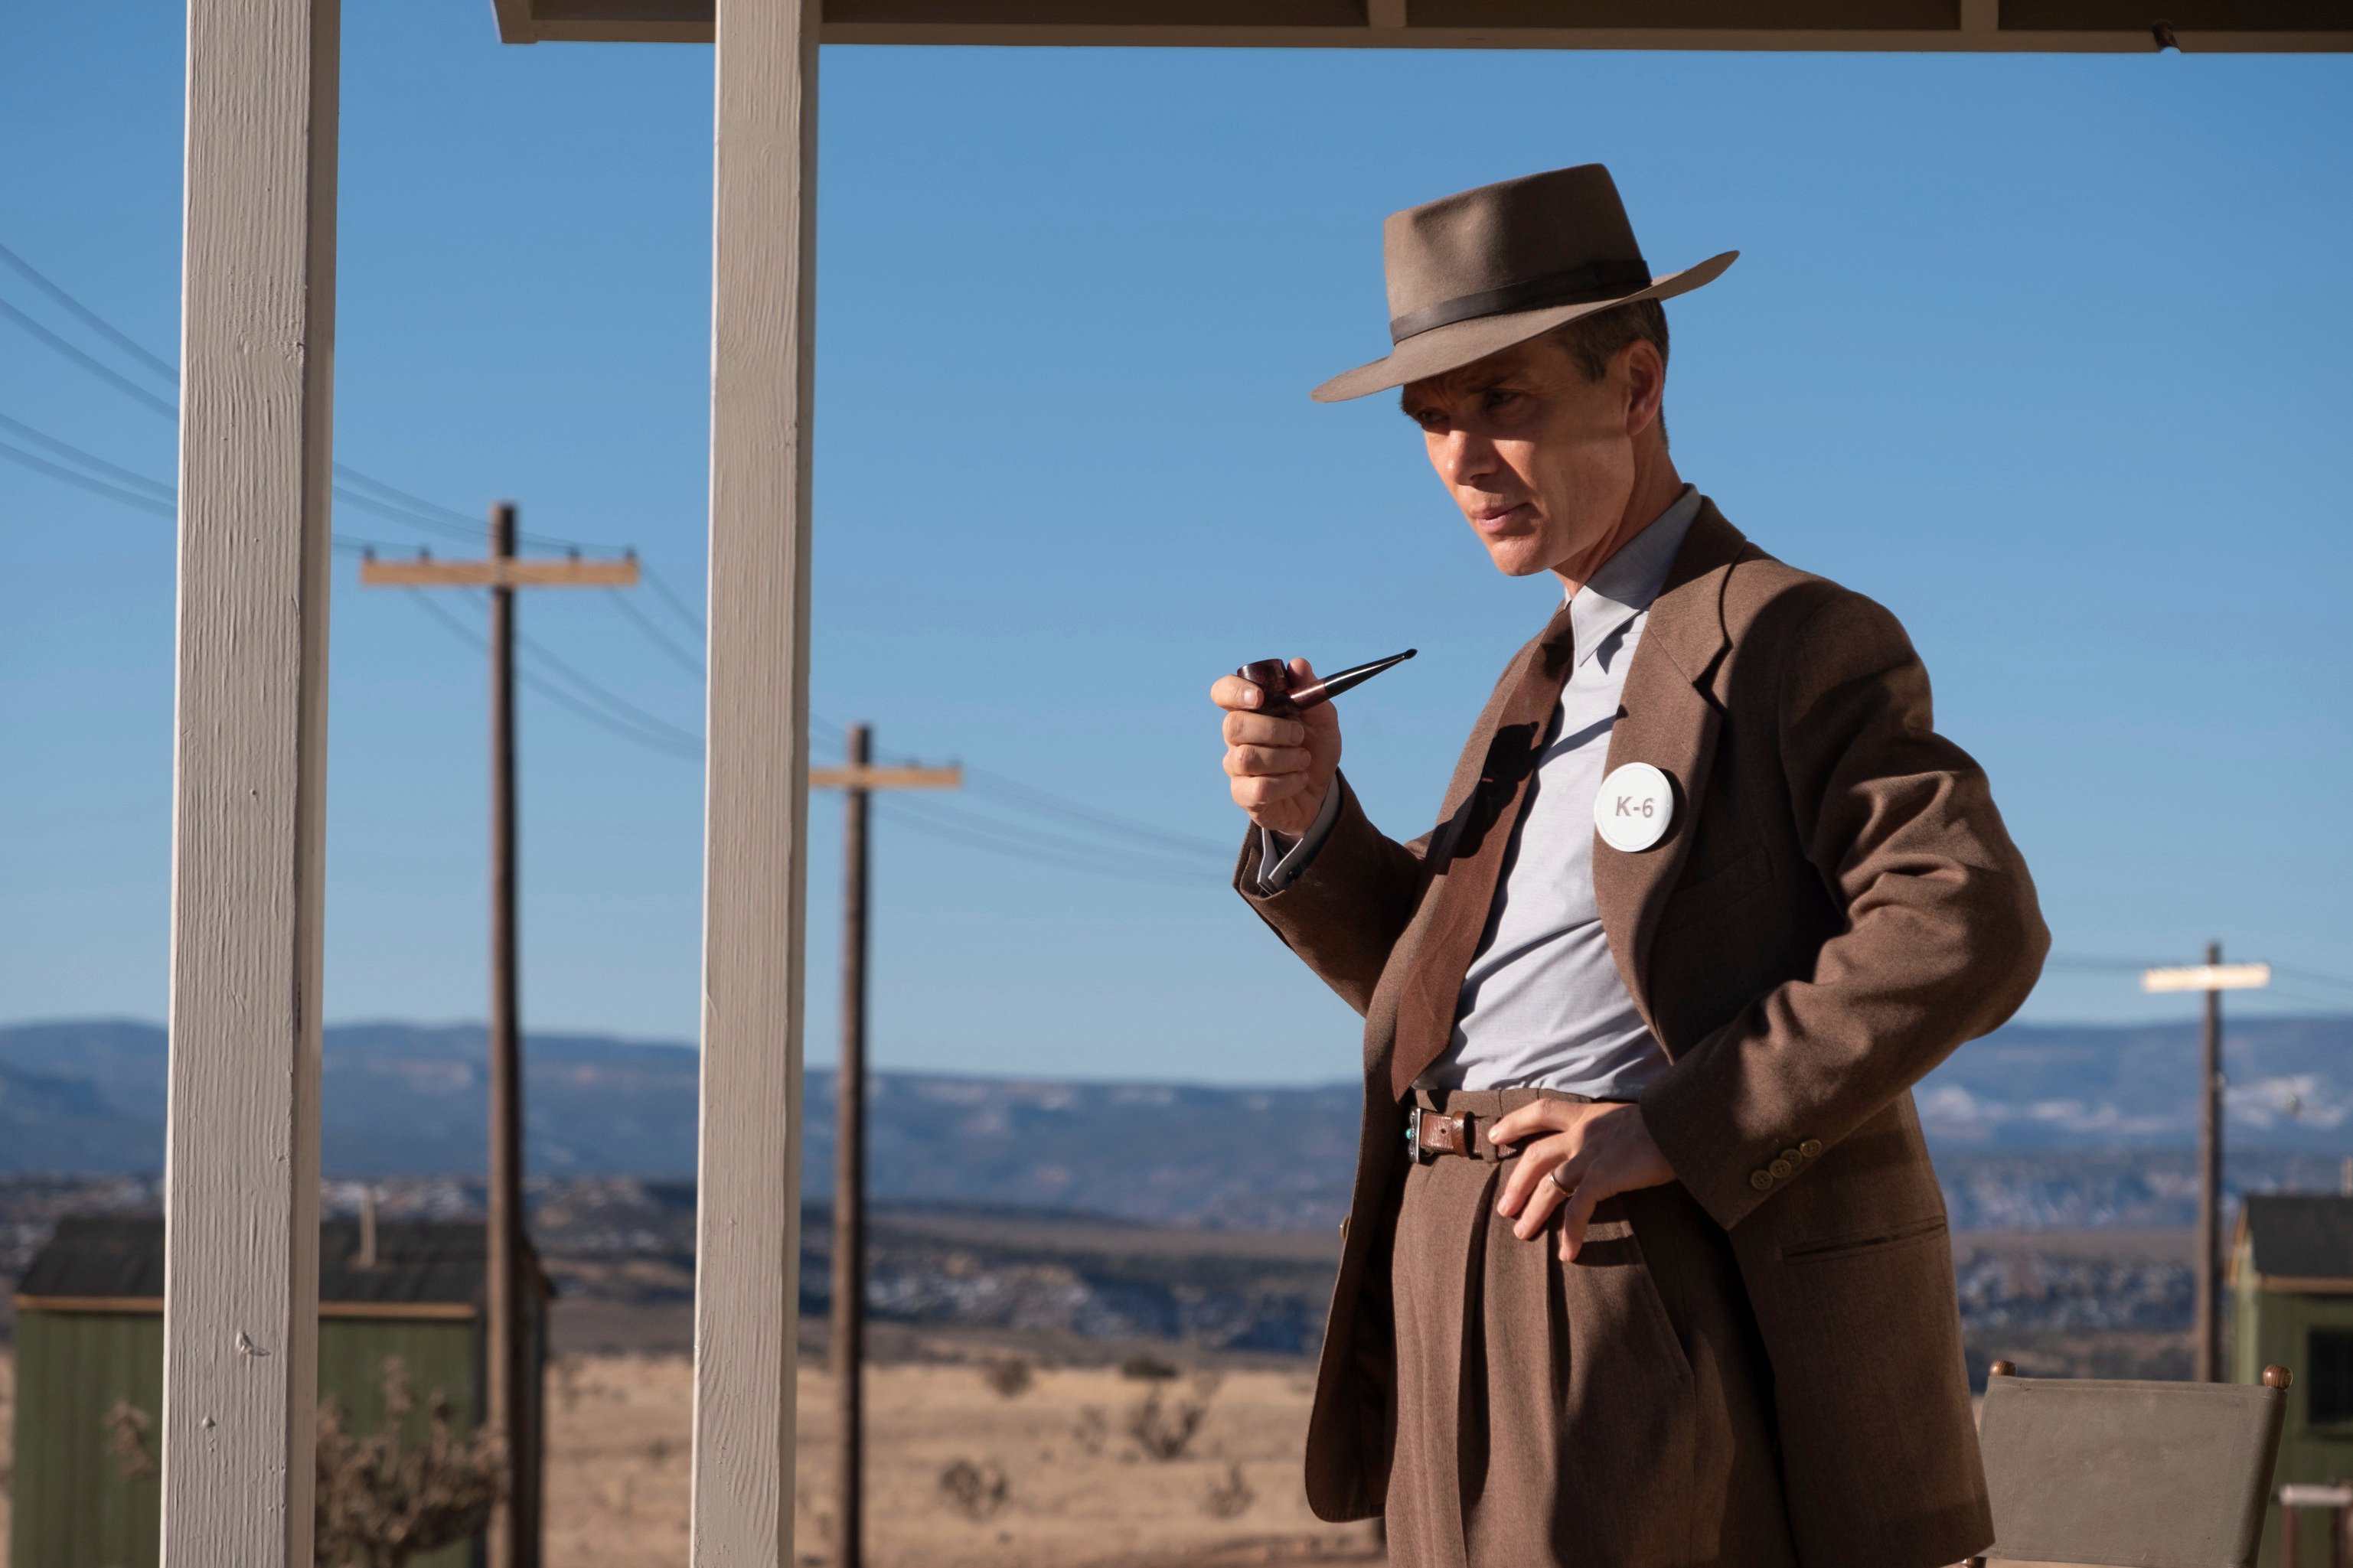 Cillian Murphy, winner of the Academy Award for best actor, in a scene from Oppenheimer, Christopher Nolan’s epic about the father of the atomic bomb. Photo: Universal Pictures via AP